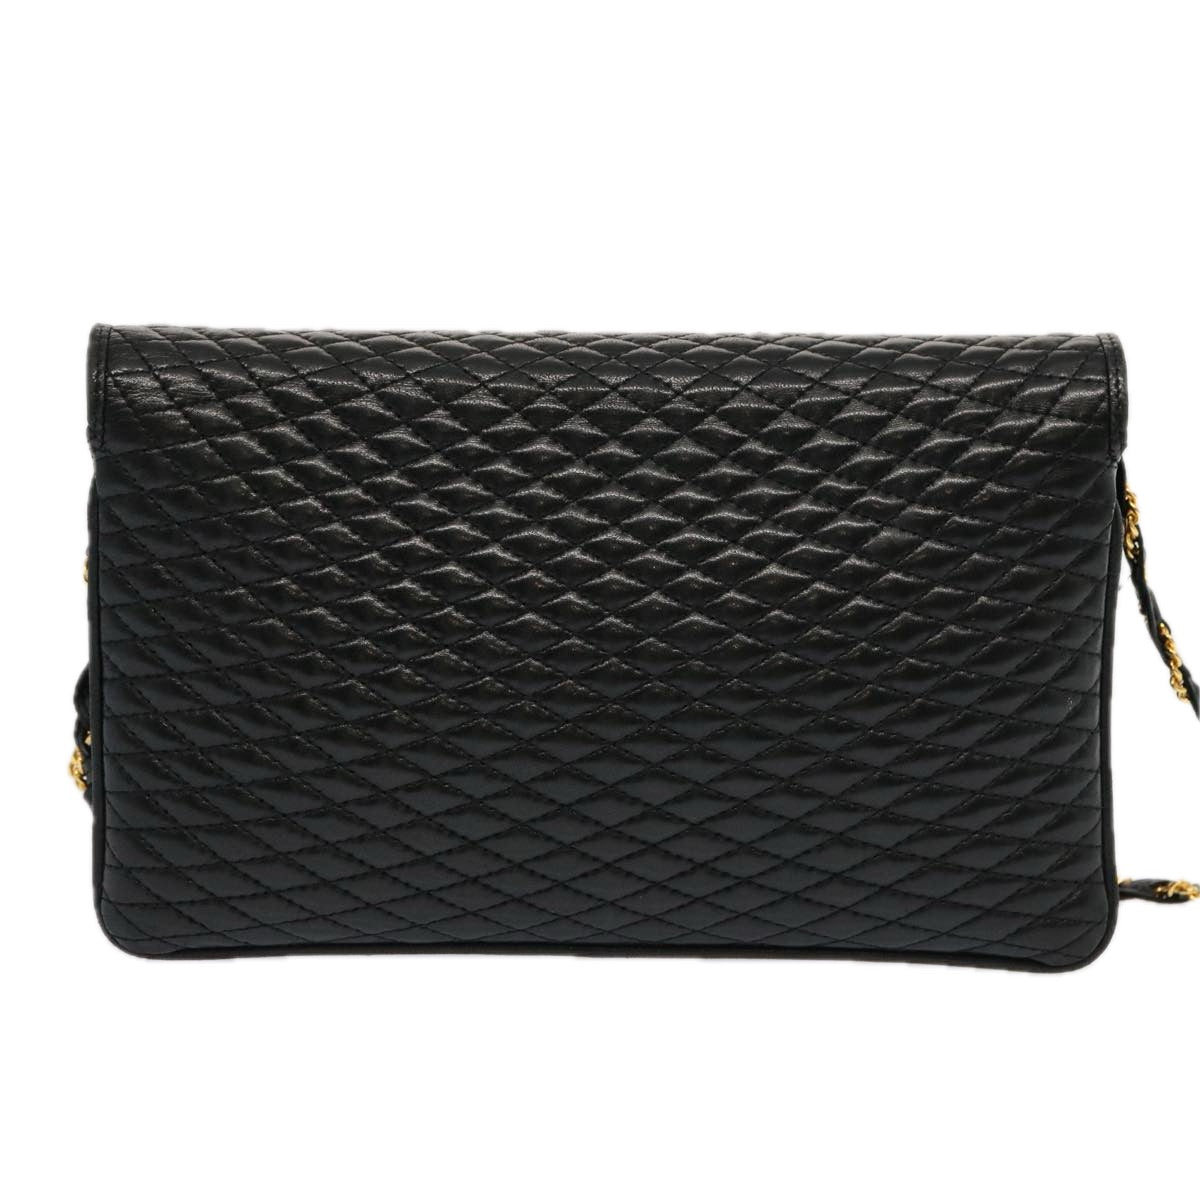 BALLY Quilted Chain Shoulder Bag Leather Black Auth am5980 - 0